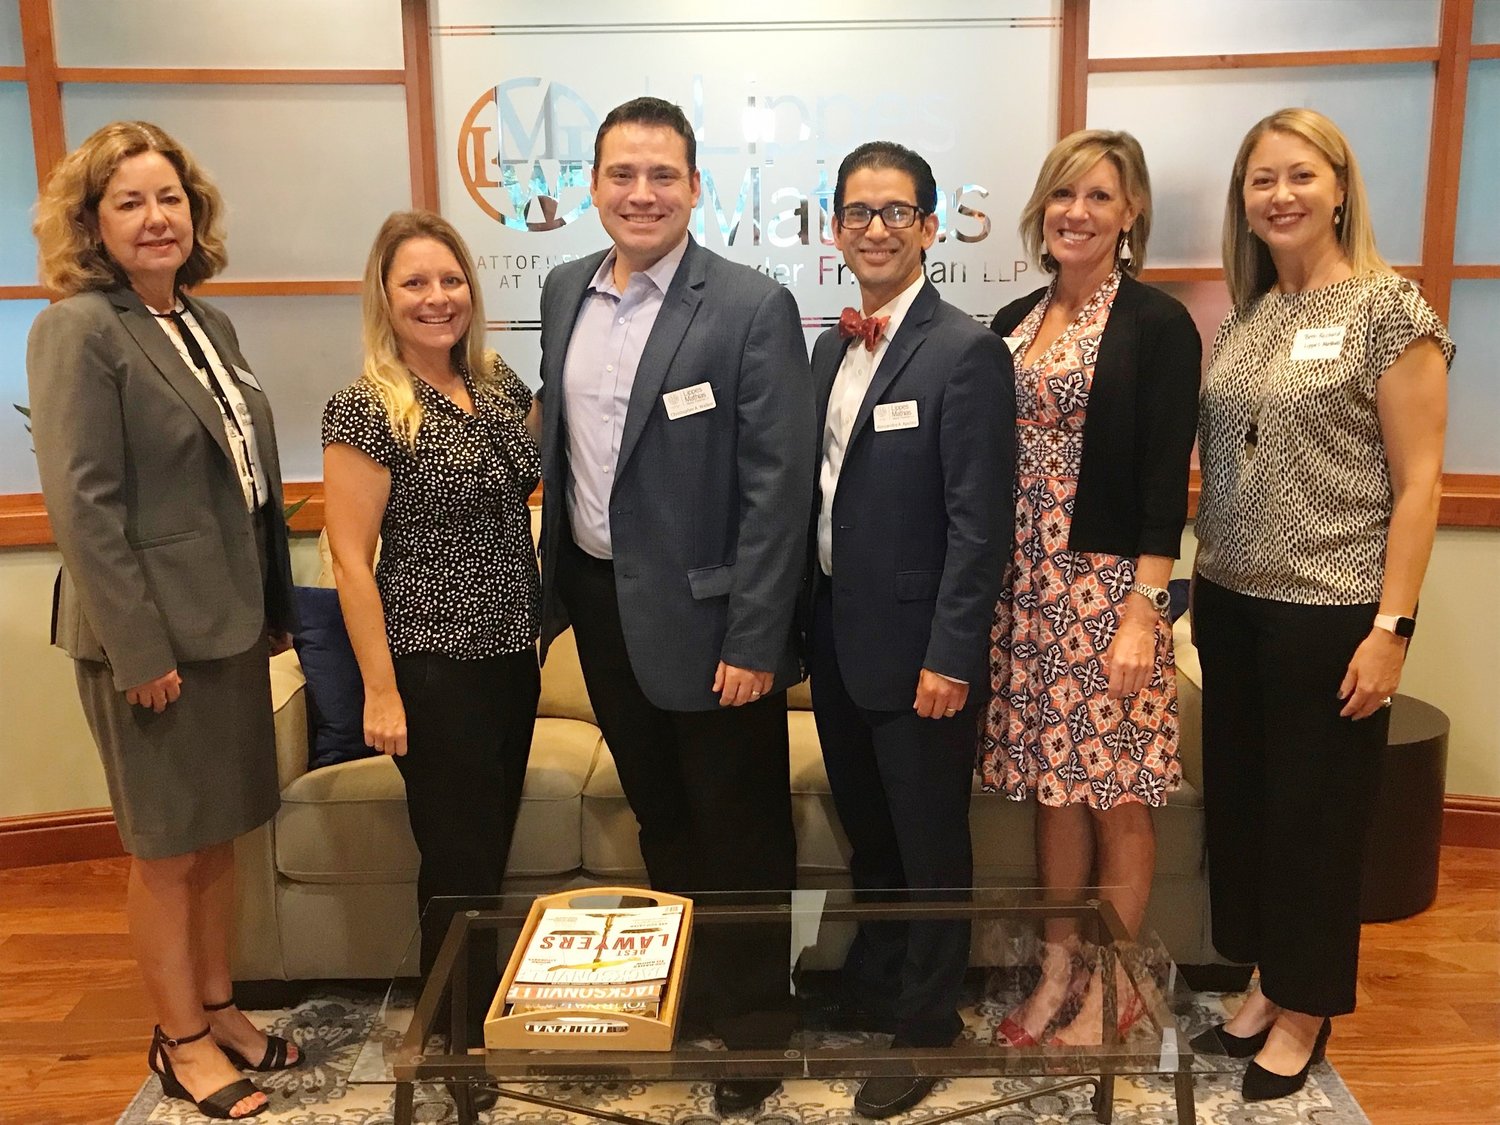 ) Karen Bourque Everett, Erika Hamer, Christopher Walker, Alessandro Apolito, Shannon M. Peabody and Bethany Reichard pose for a photo at the Chamber Before Hours event at Lippes Matthias Wexler Friedman LLP.